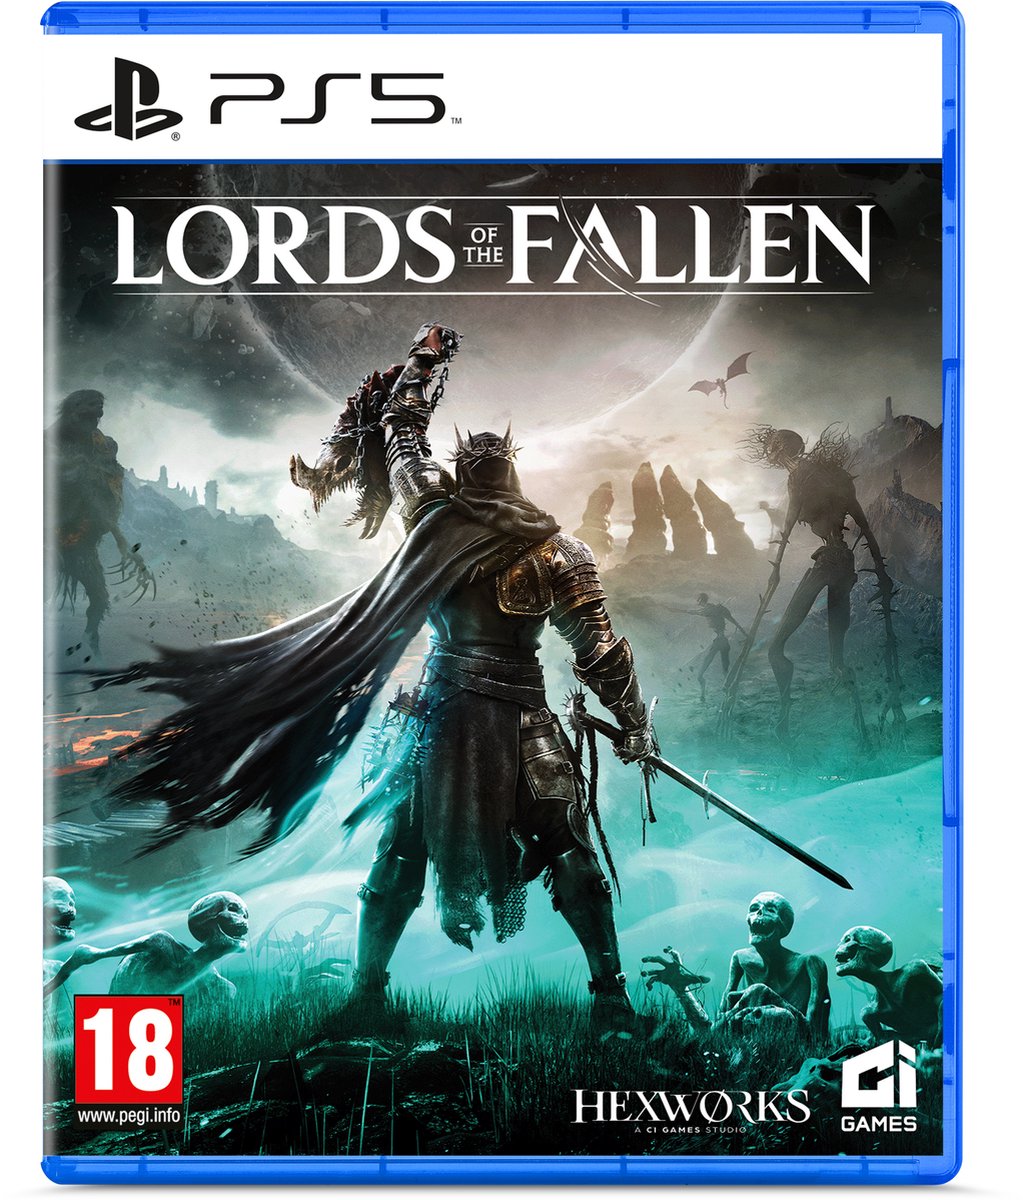 Lords of the Fallen (PS5), Hexworks, Ci Games